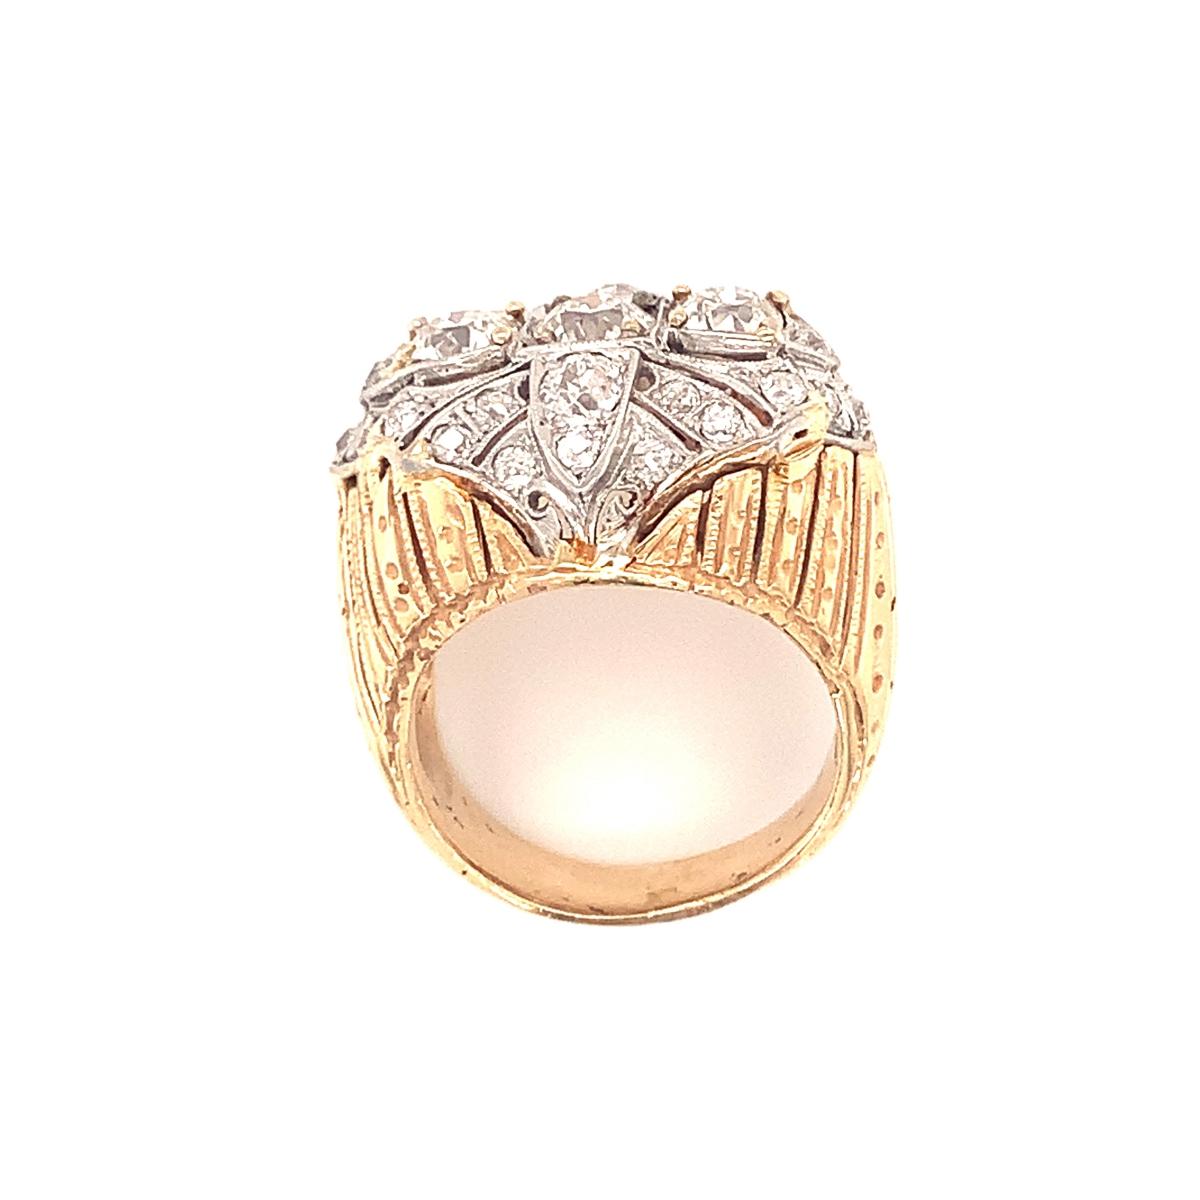 Women's Vintage Diamond Platinum and 18K Yellow Gold Ring, circa 1960s For Sale